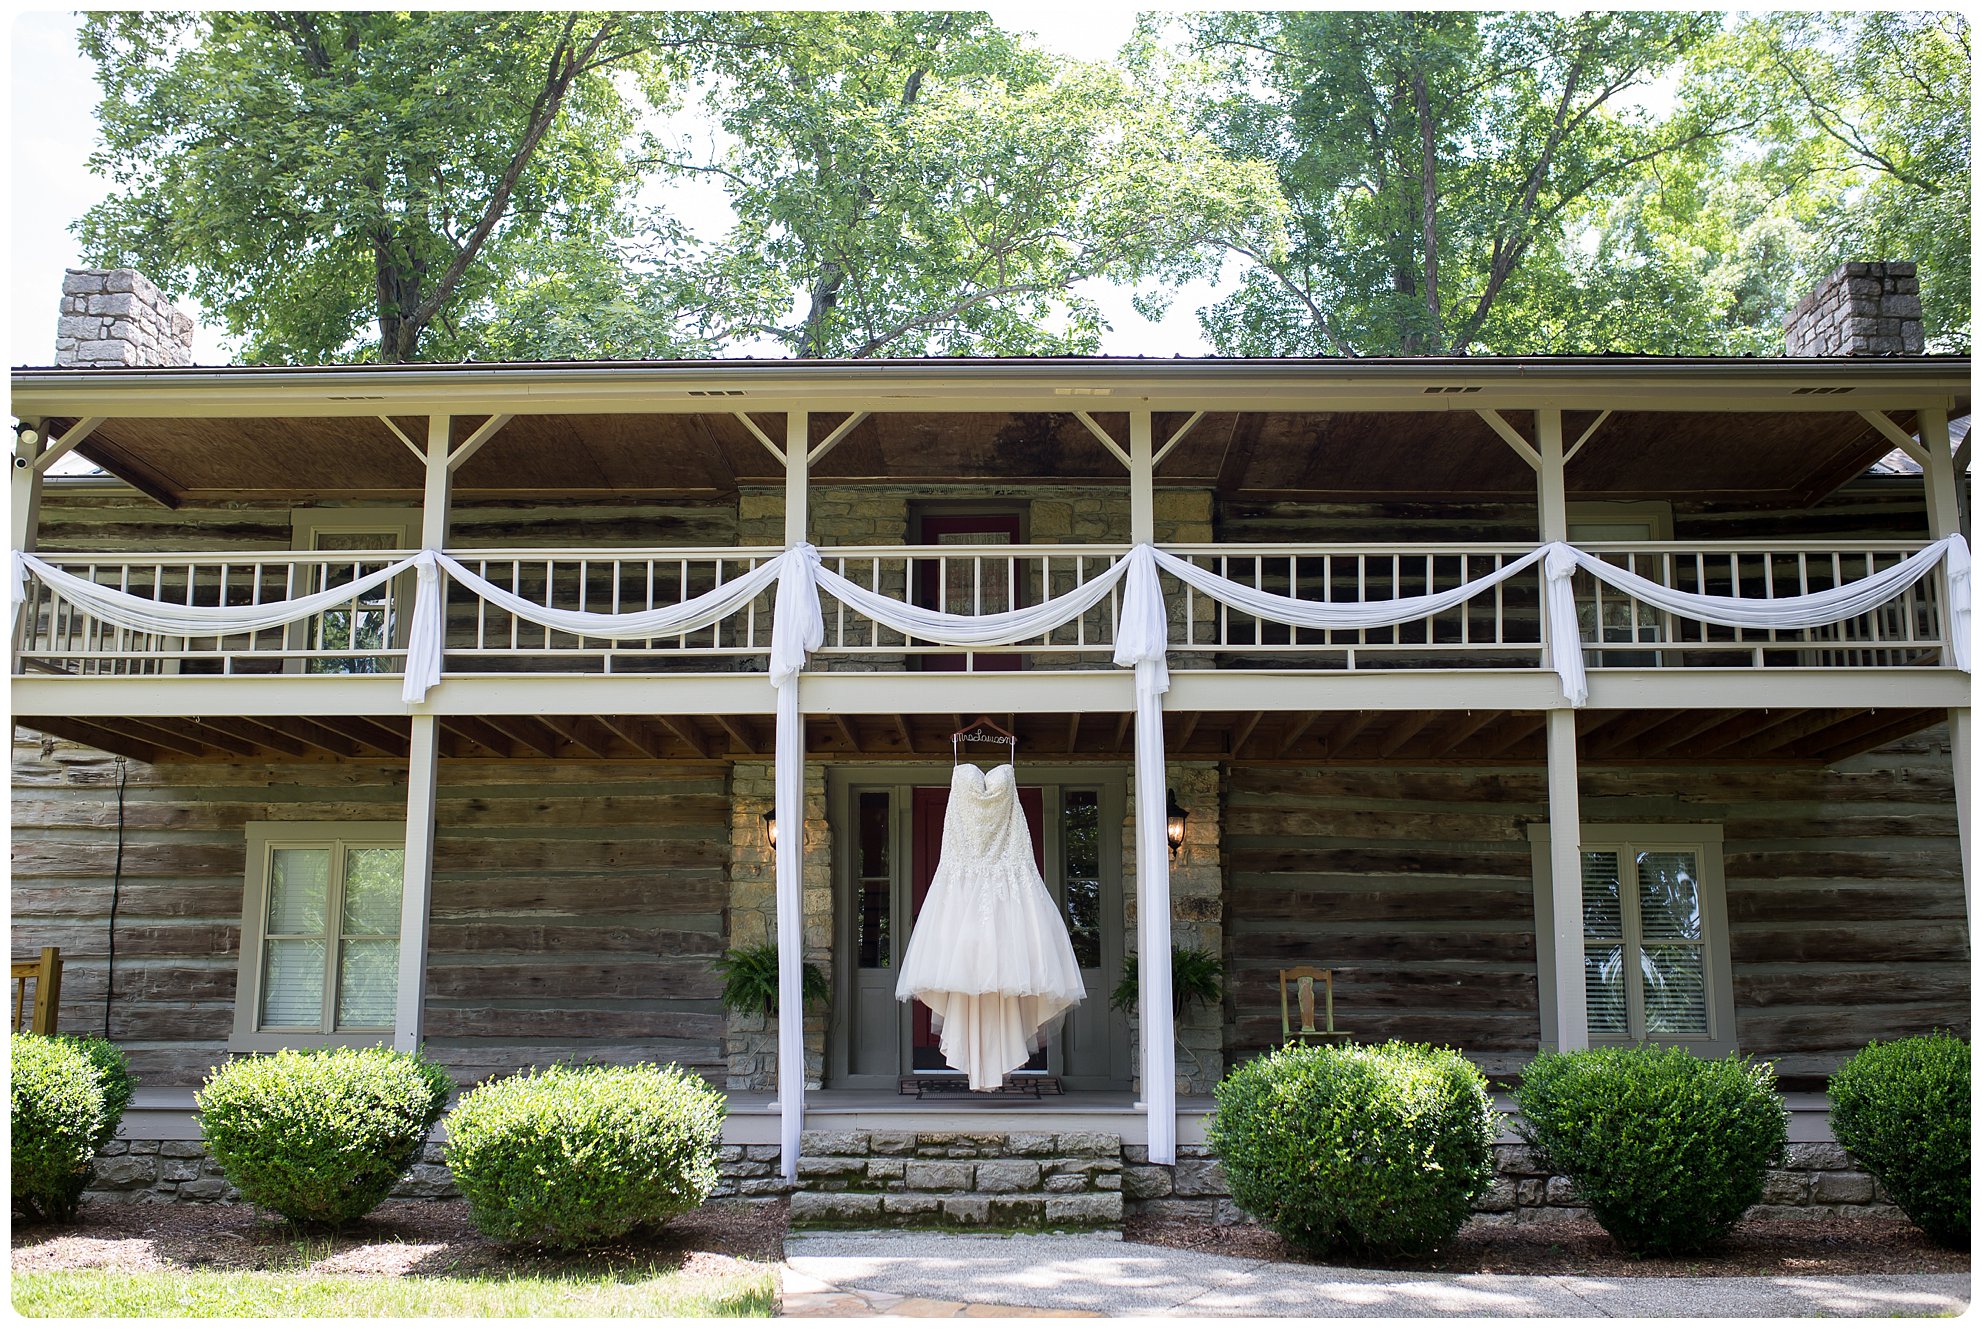 Nashville wedding at Iriswoods, Southern Belles and Blooms, whimsical garden wedding, southern wedding, southern bride, nashville bride, melanie grady photography, the best nashville wedding photographer, interracial couple wedding, mt juliet, 